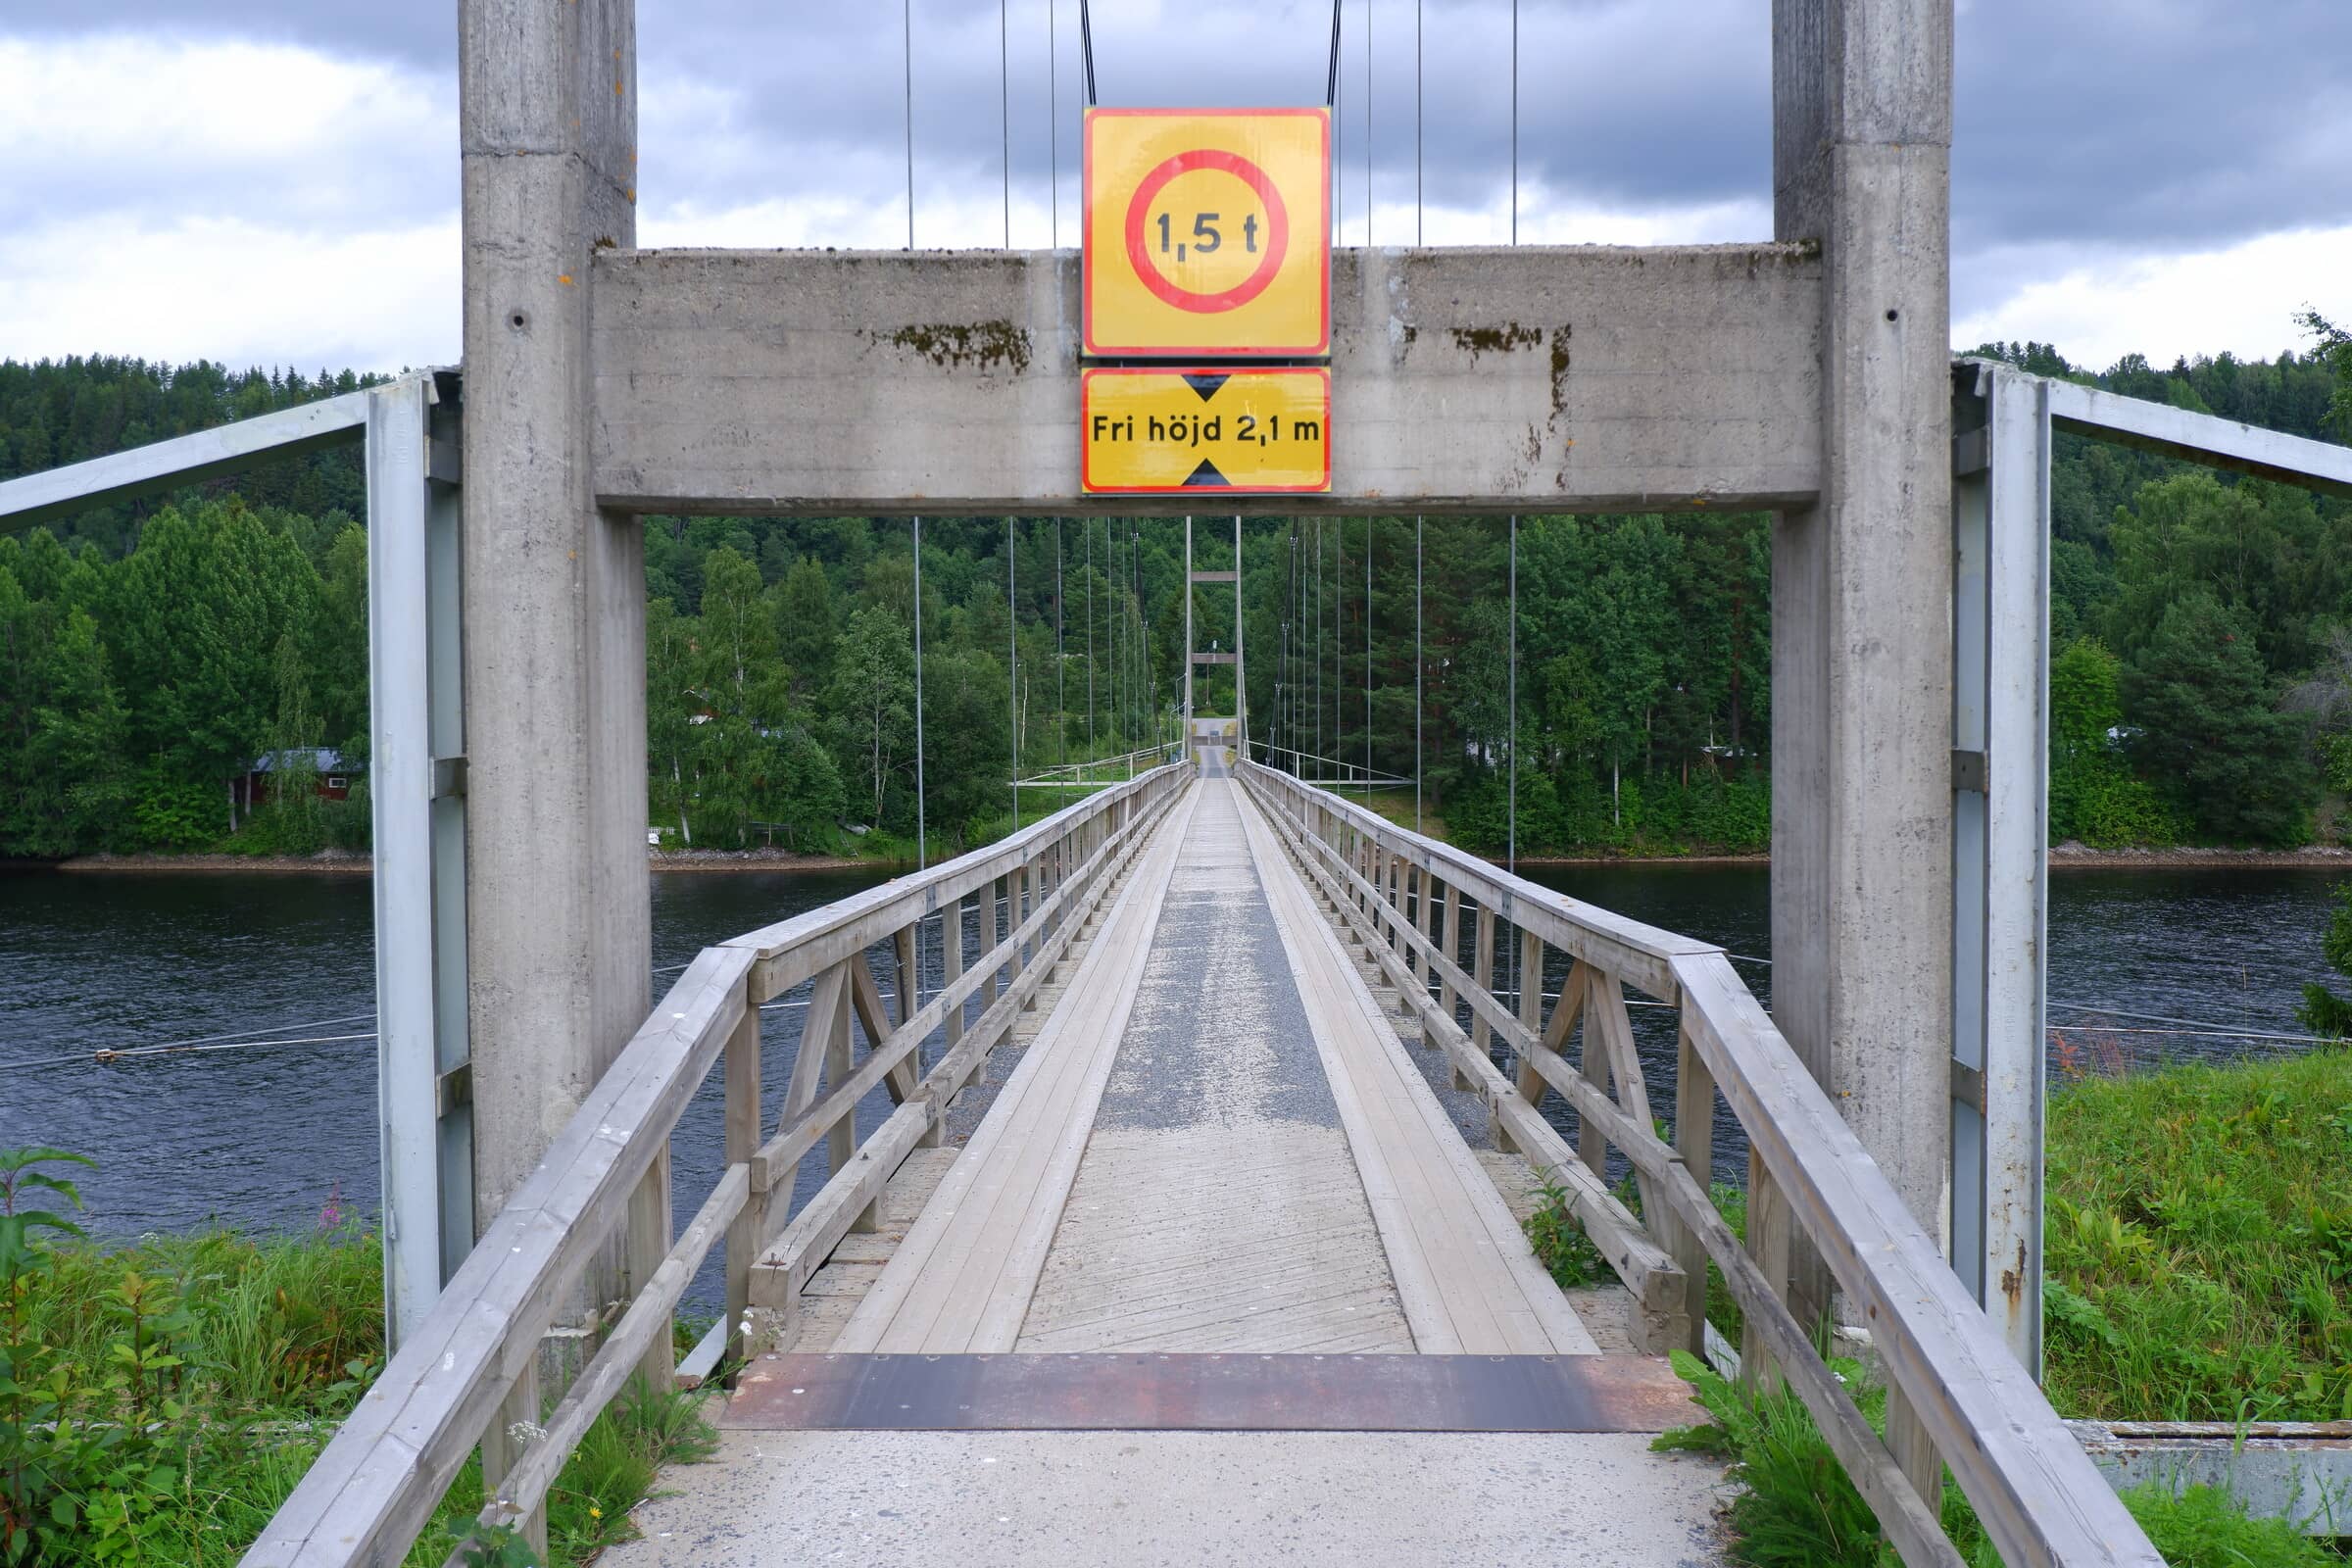 An old wooden bridge. Picture taken straight thru the pylons. There's a sign above the road telling people that it can handle less than 1.5 tonnes.